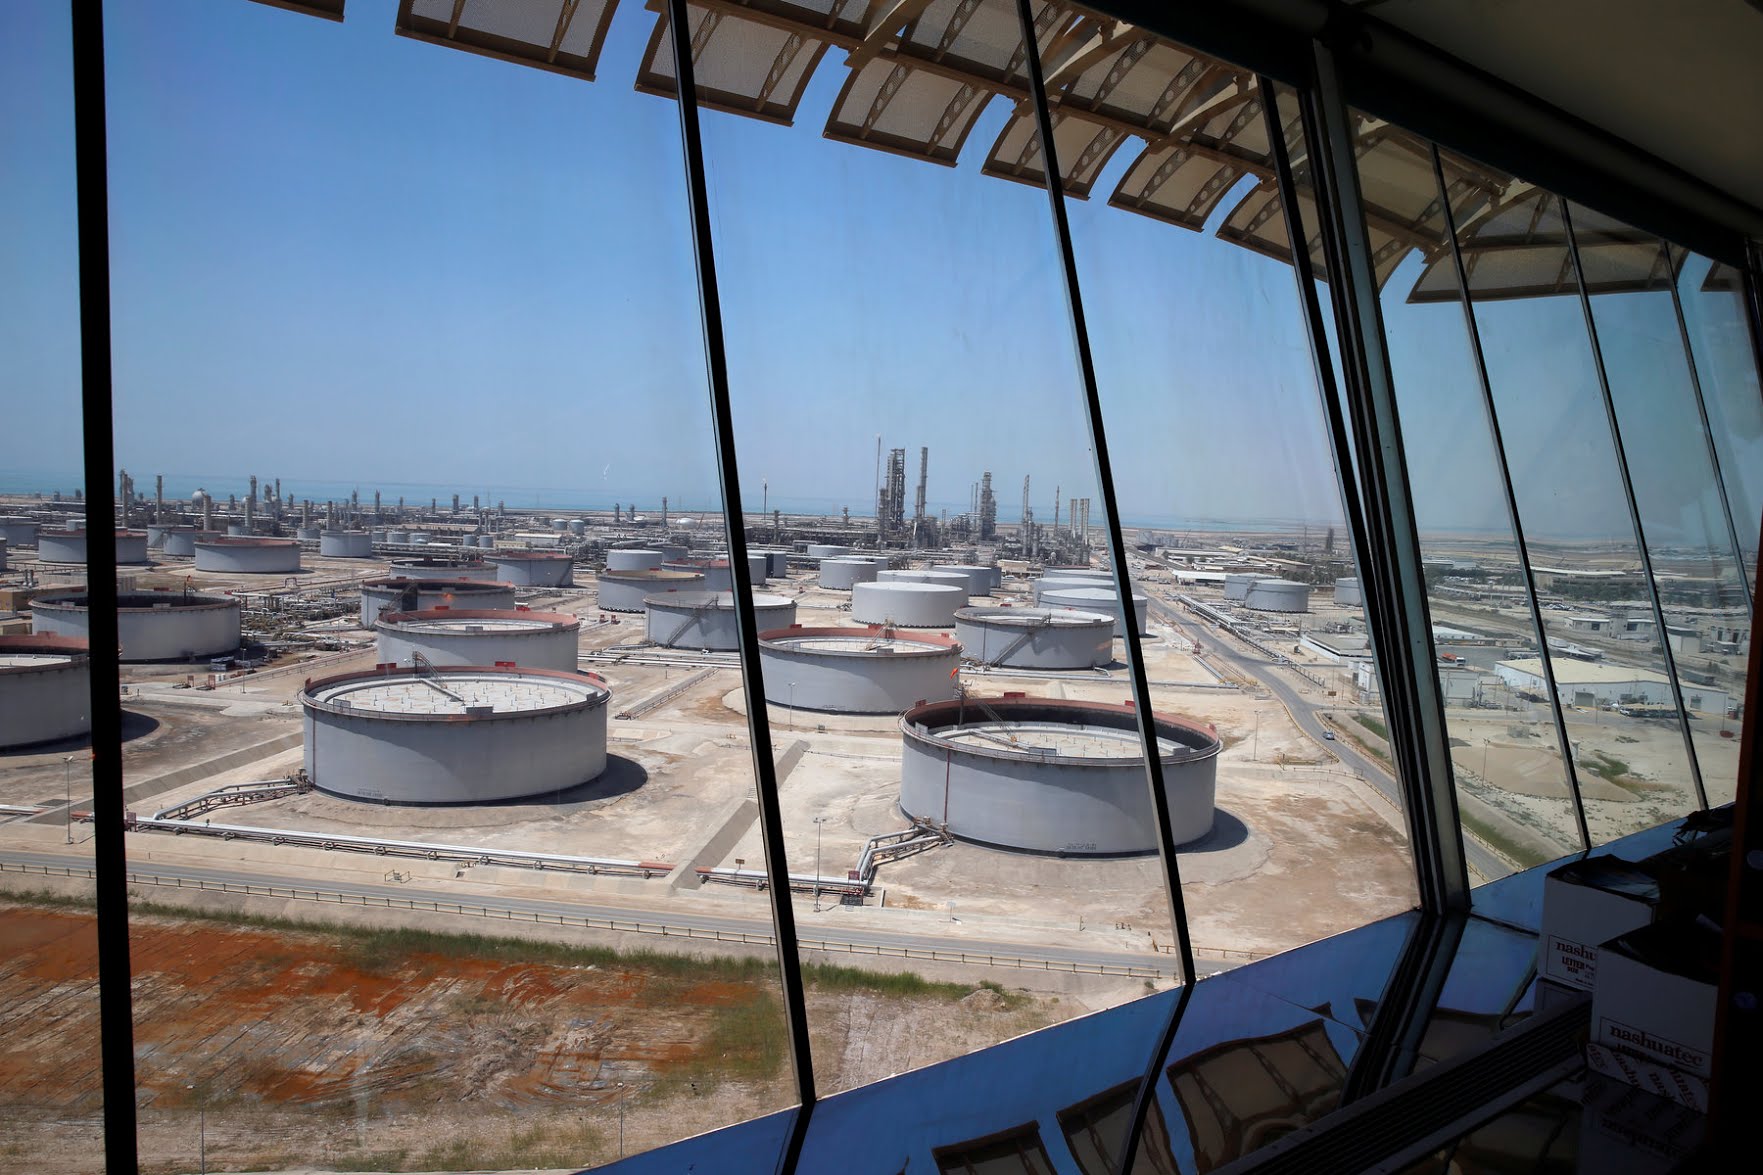 Saudi Aramco’s Ras Tanura oil refinery and oil terminal. Shares of Saudi Aramco fell on Sunday below their initial public offering price for the first time.